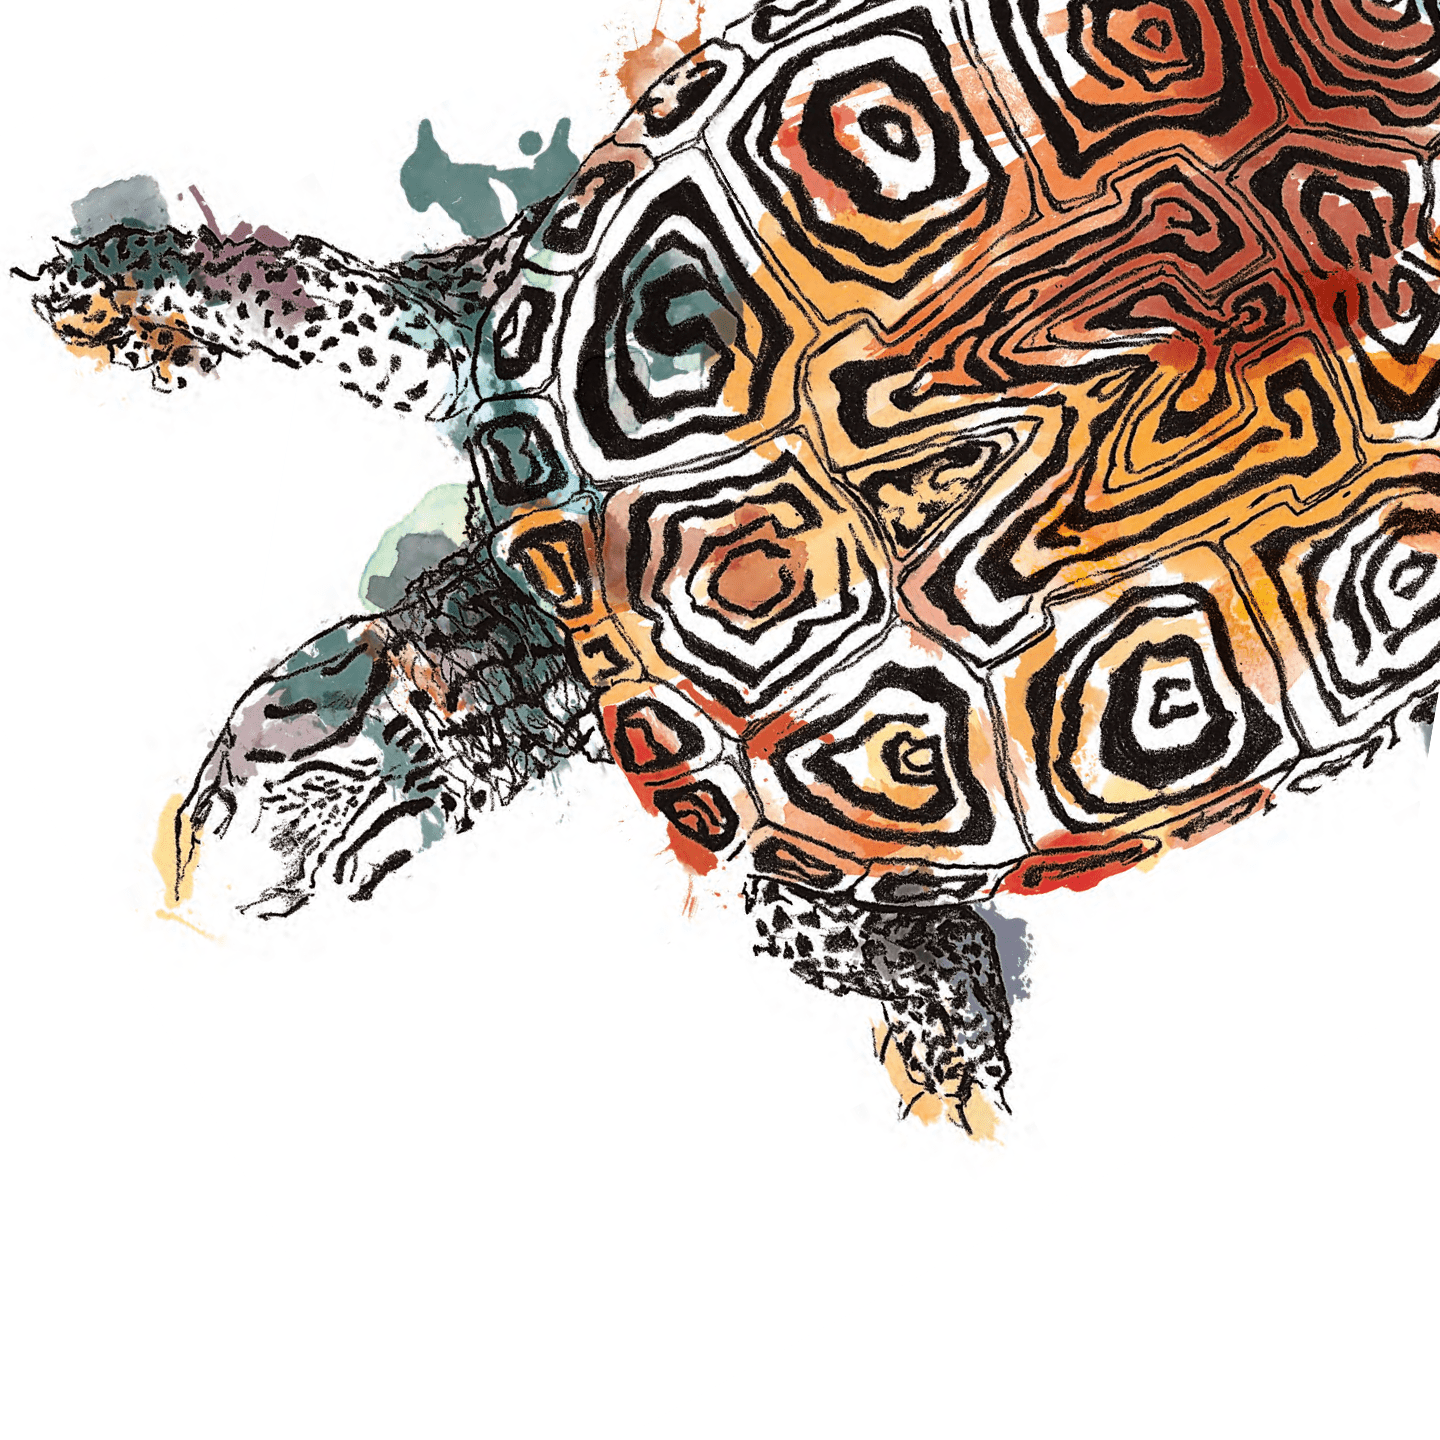 Turtle illustration in watercolor with an M pattern shell